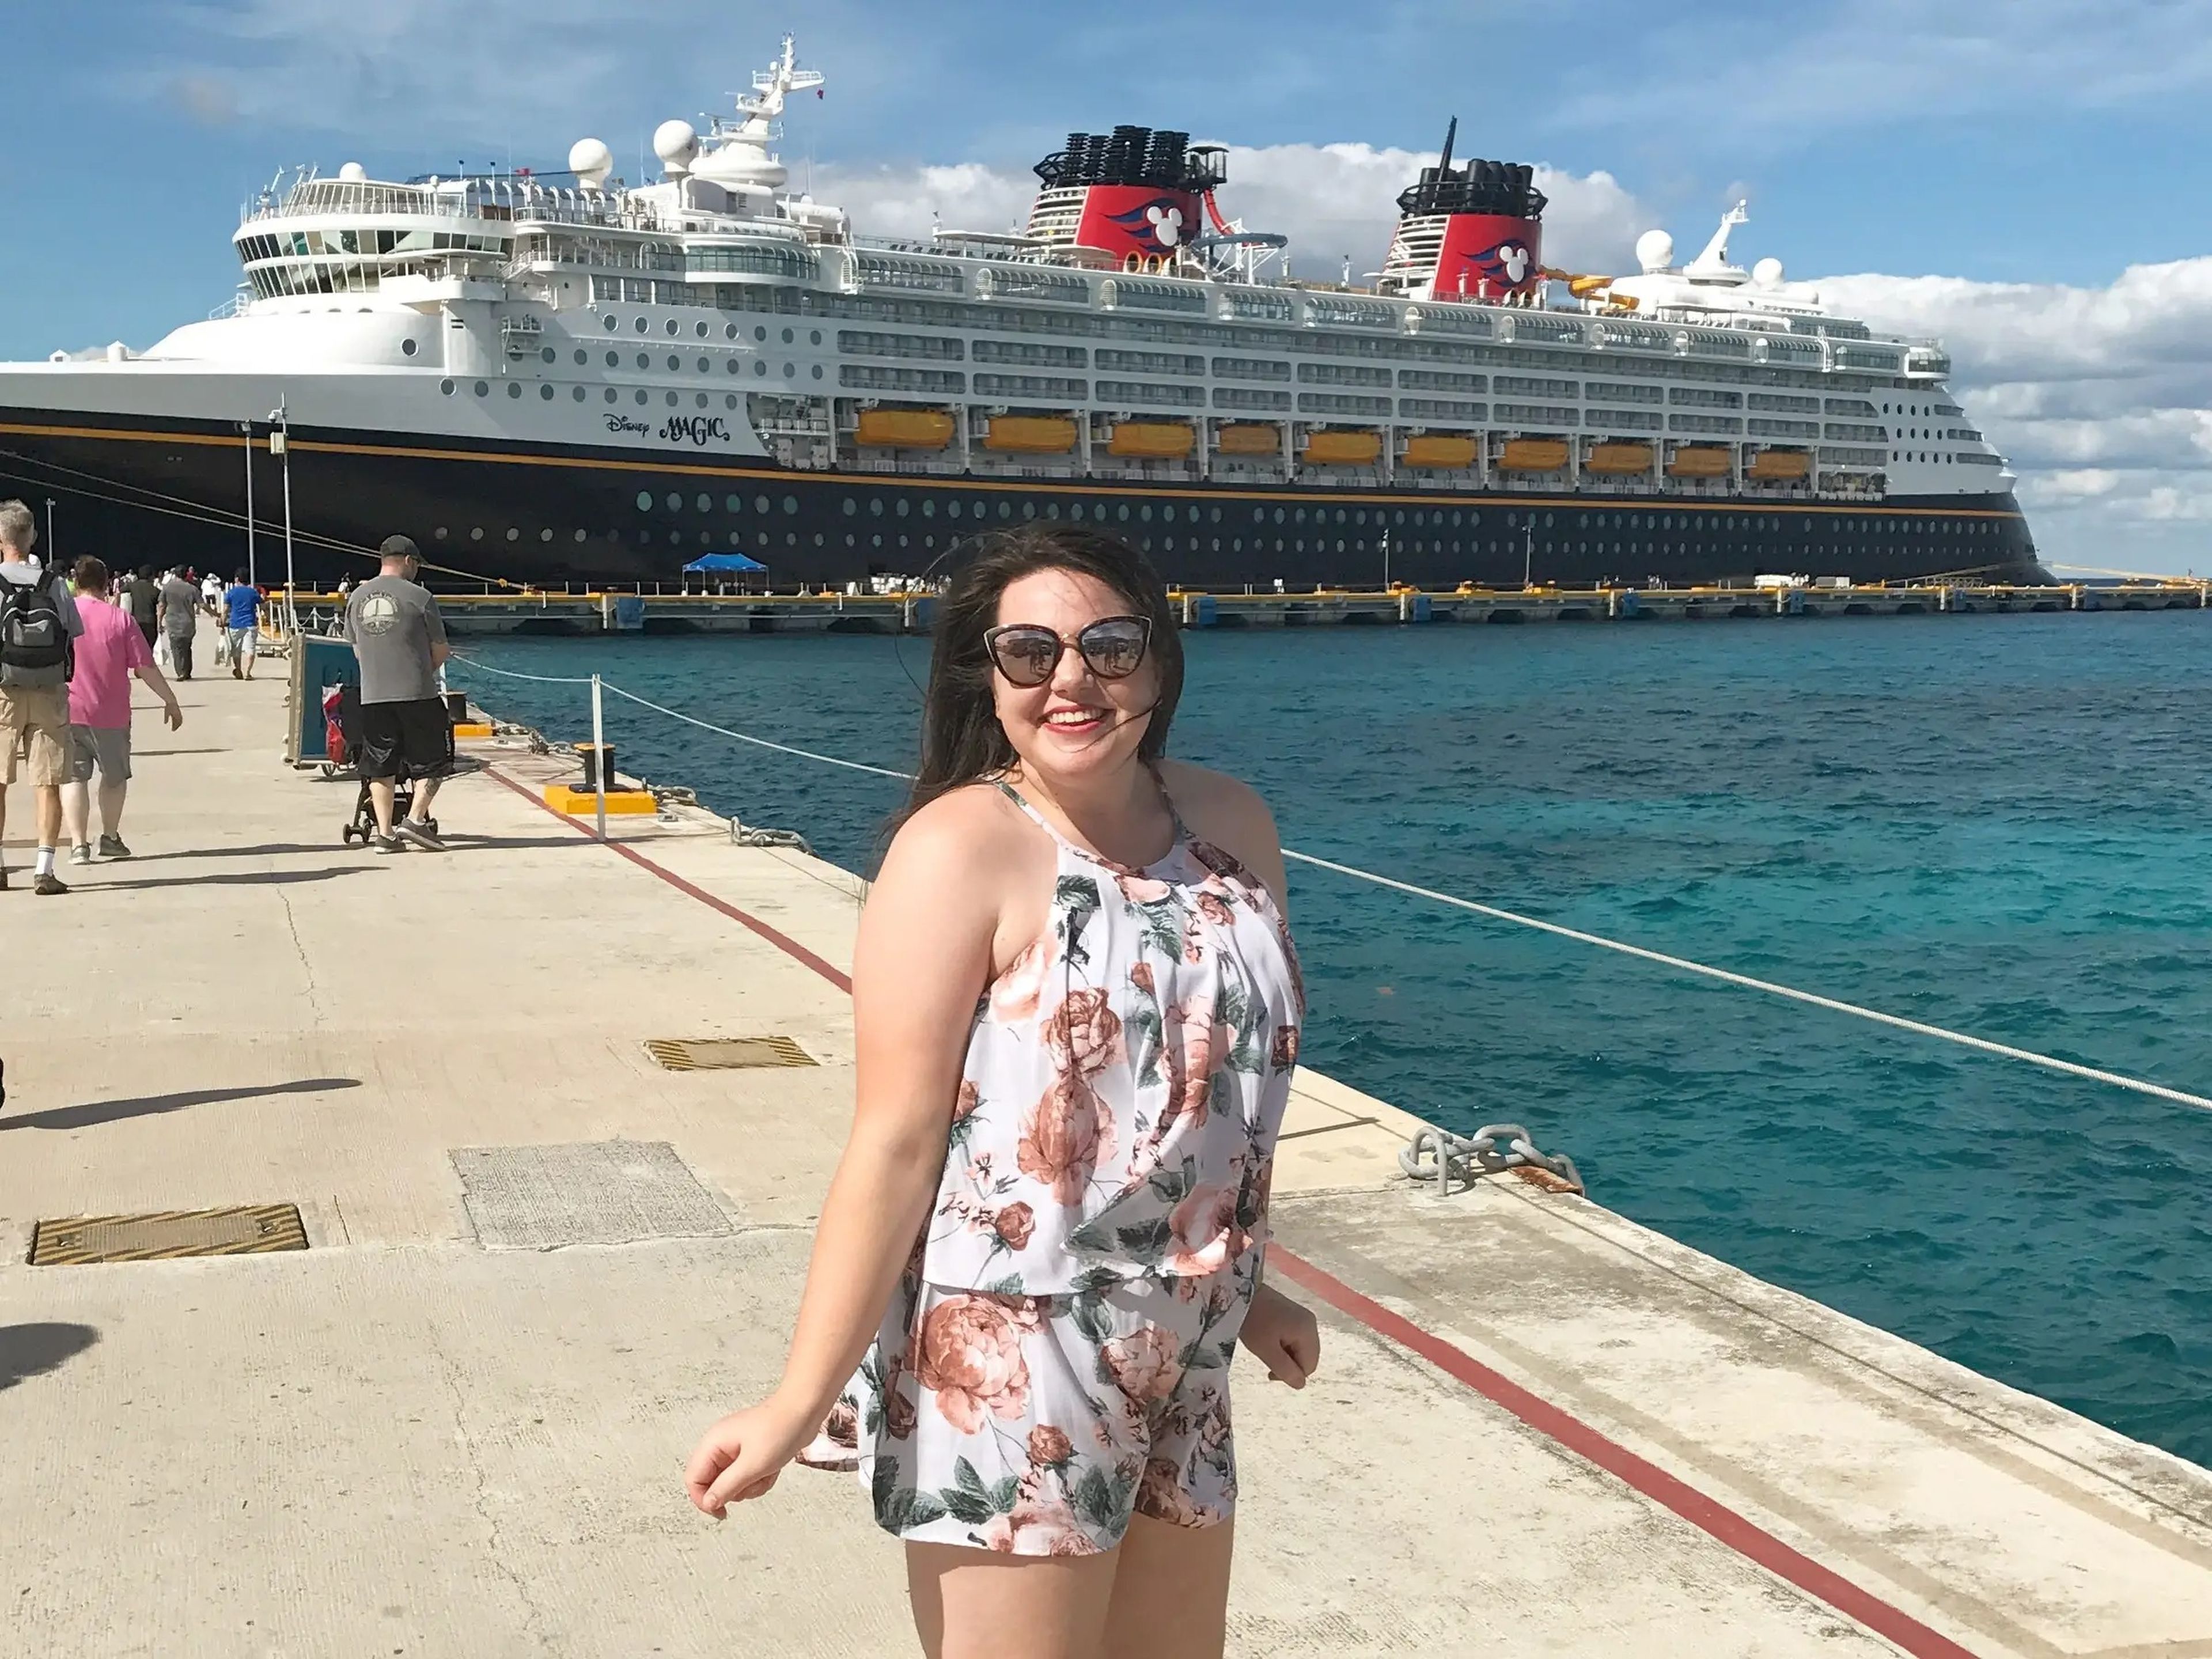 megan posing in front of a cruise ship at a port